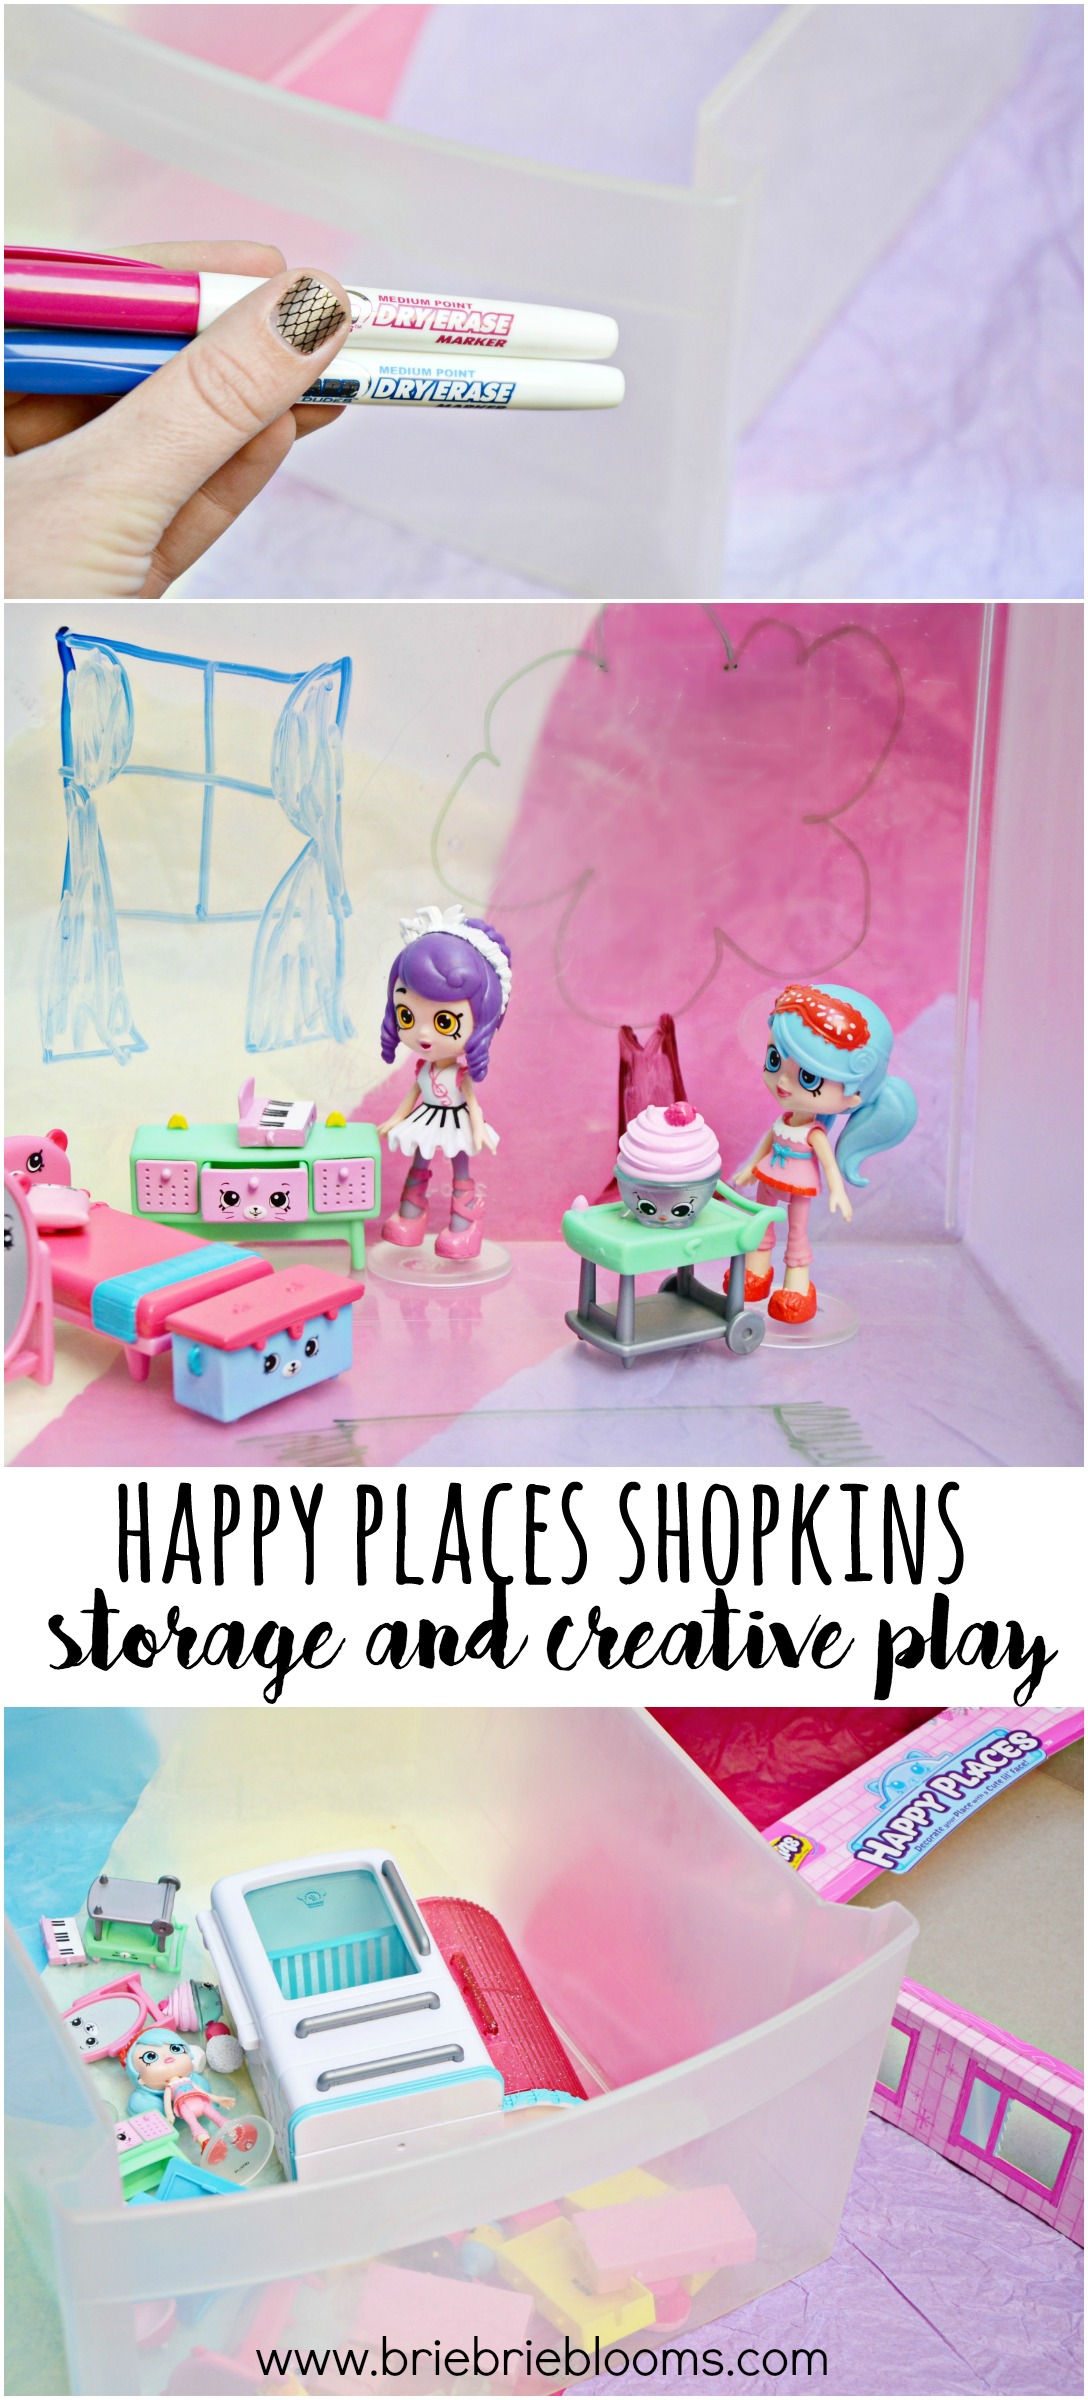 Happy Places Shopkins storage and creative play